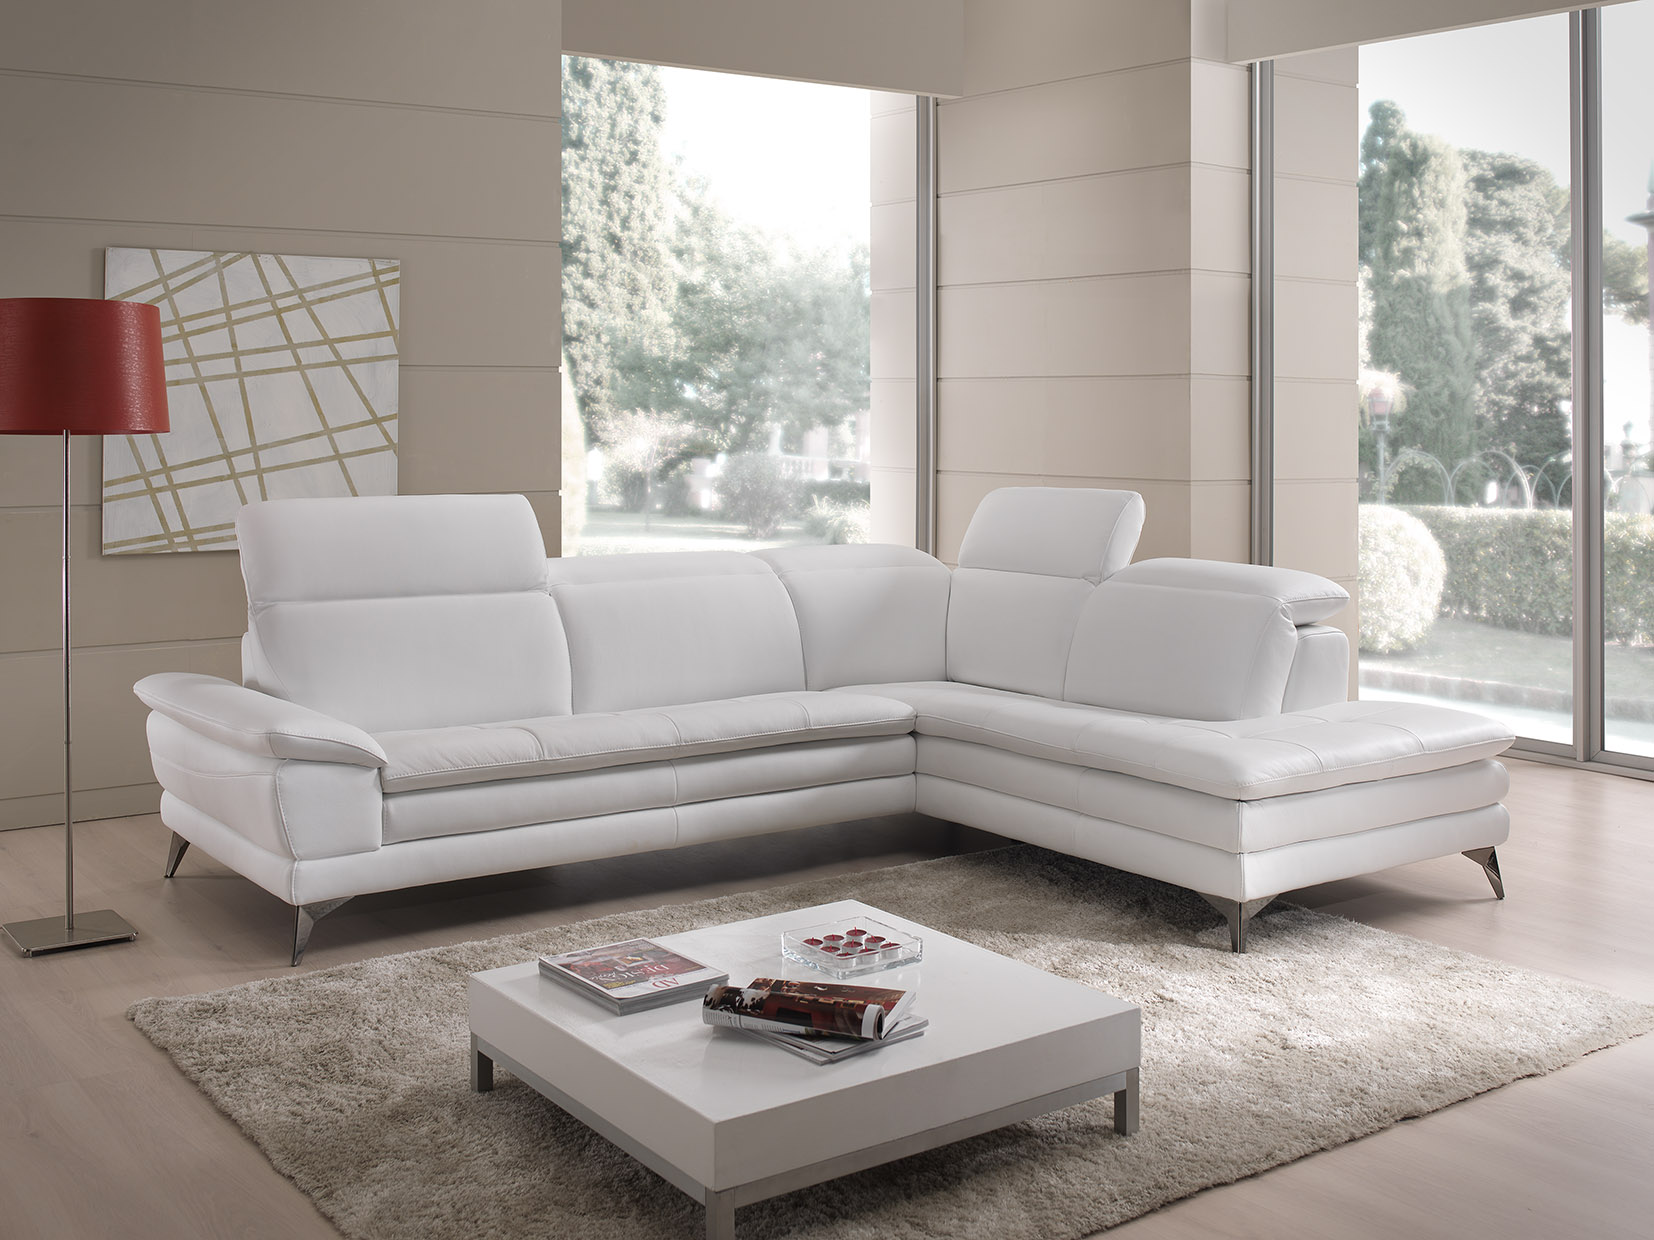 Living Room Furniture Sleepers Sofas Loveseats and Chairs Hop Living